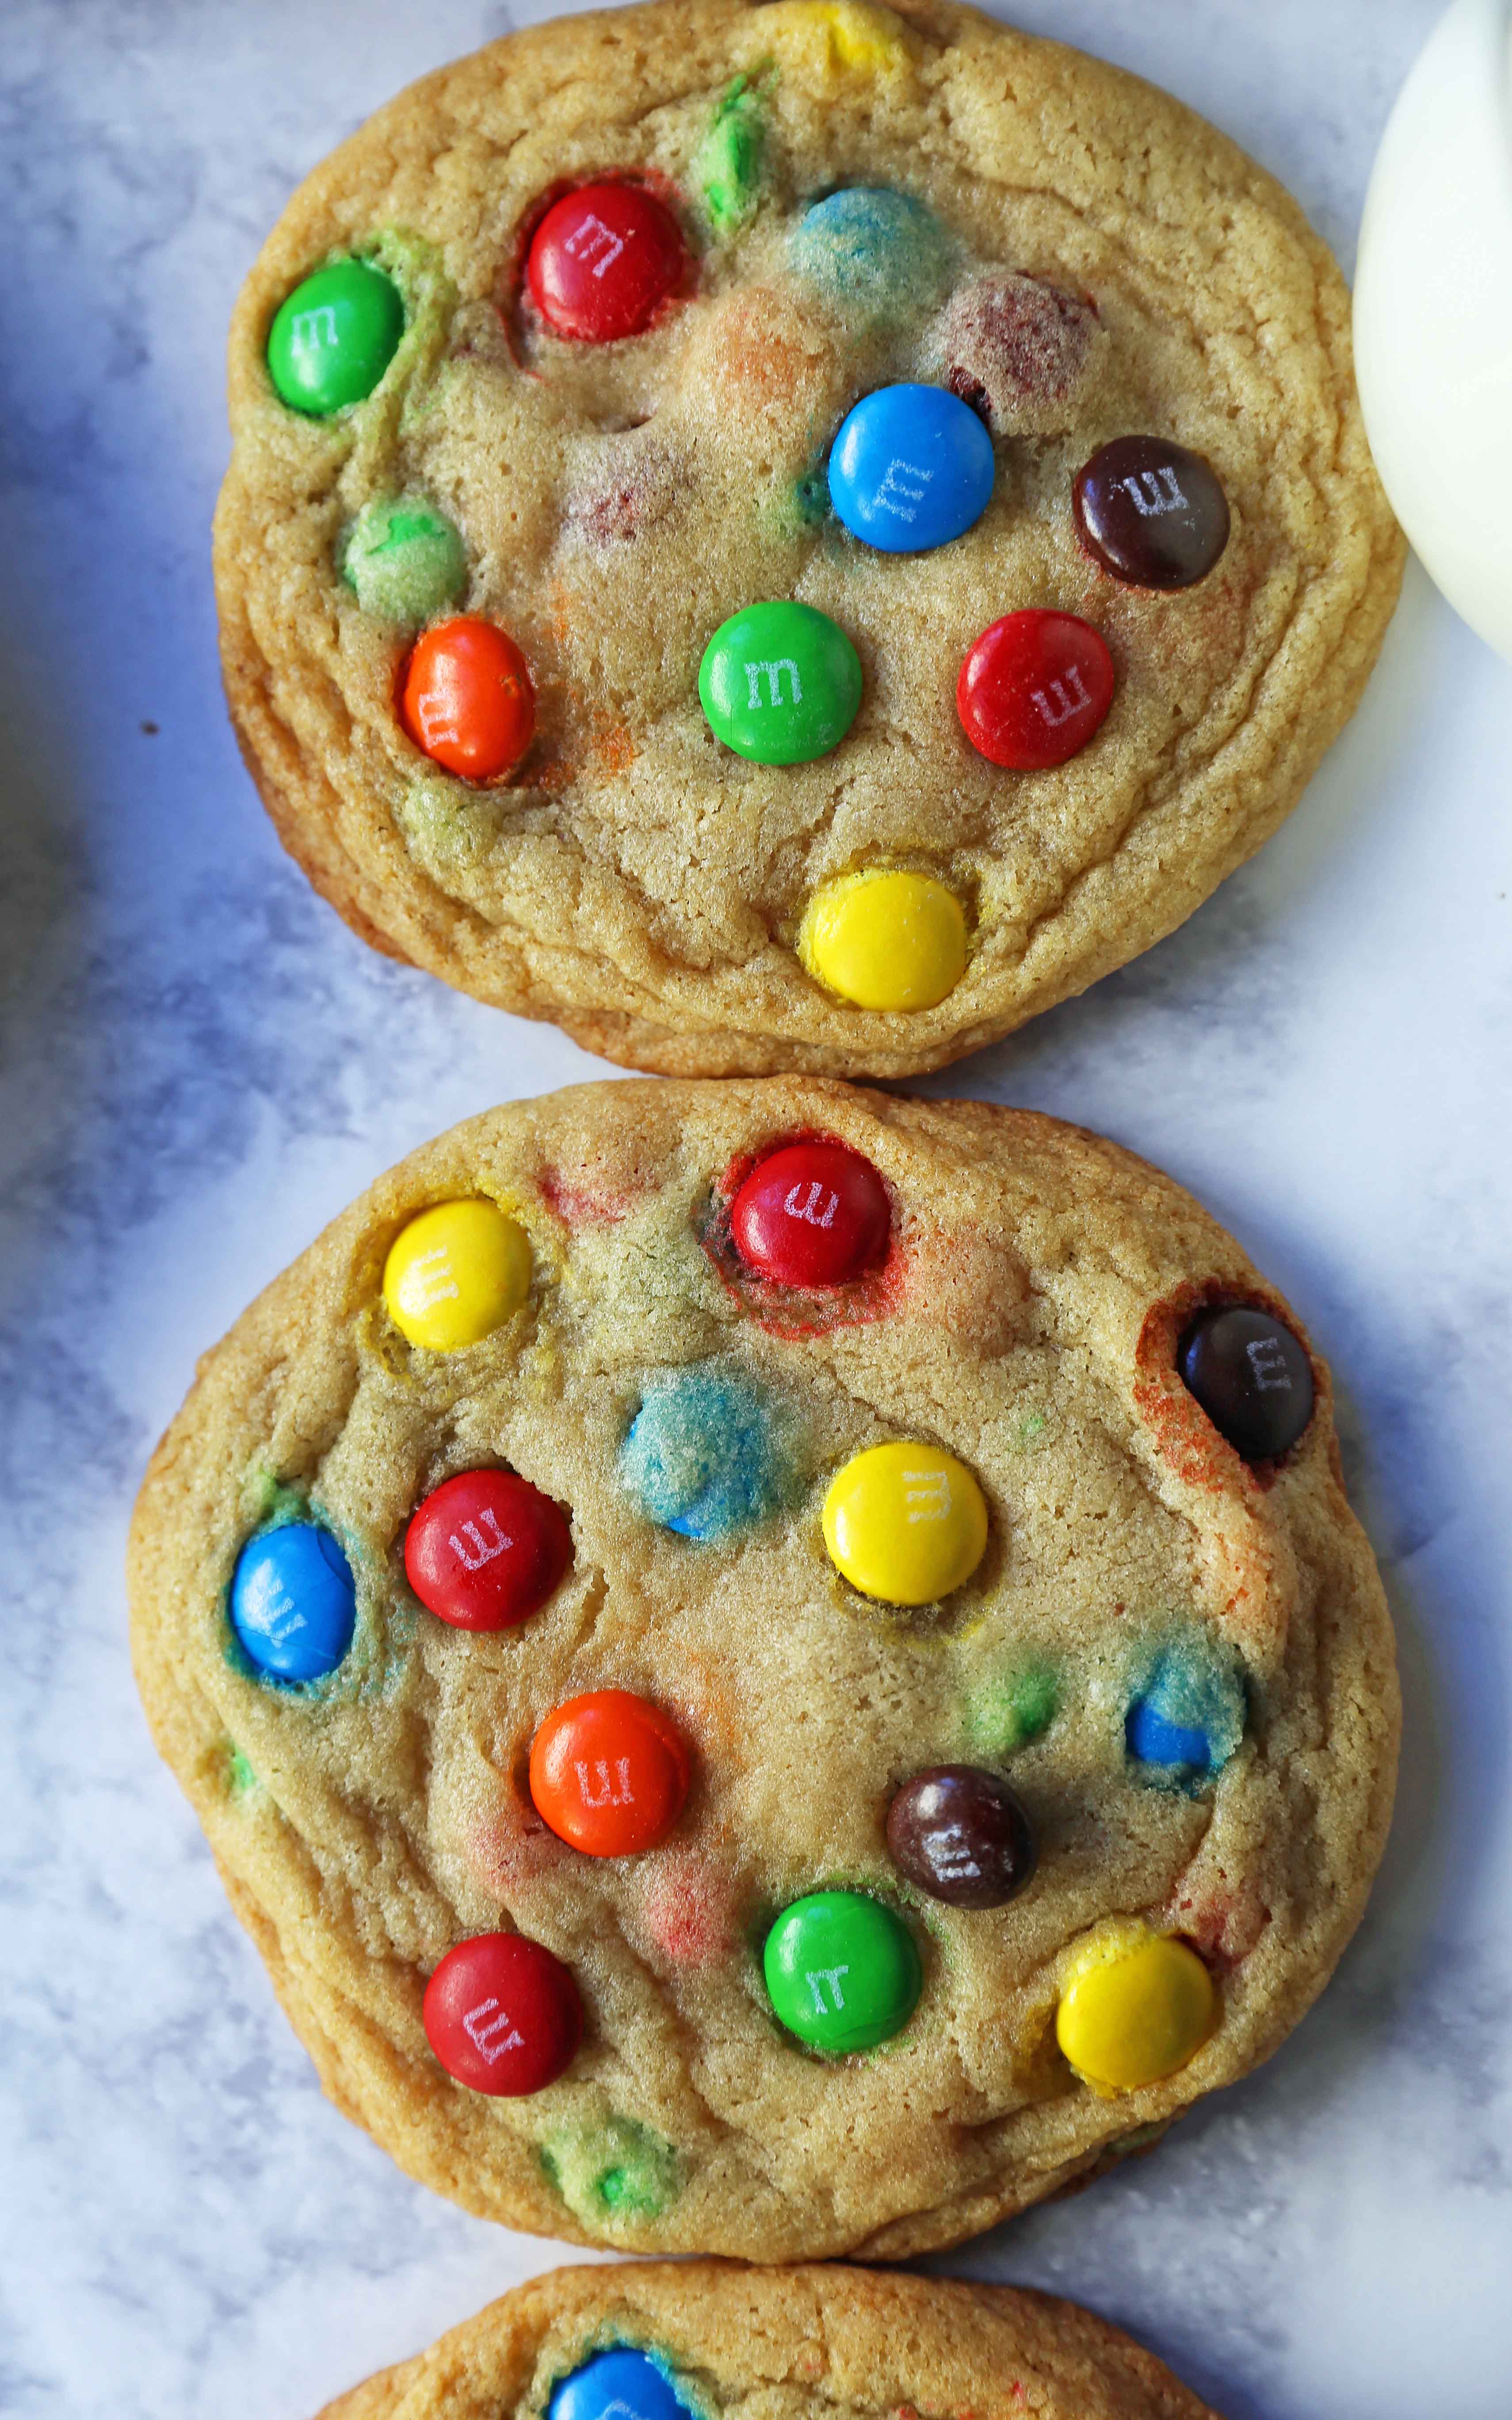 Soft and Chewy M & M Cookies. The best M & M cookie recipe. How to make the perfect M & M cookie. www.modernhoney.com #cookie #cookies #m&mcookie #m&mcookies #dessert